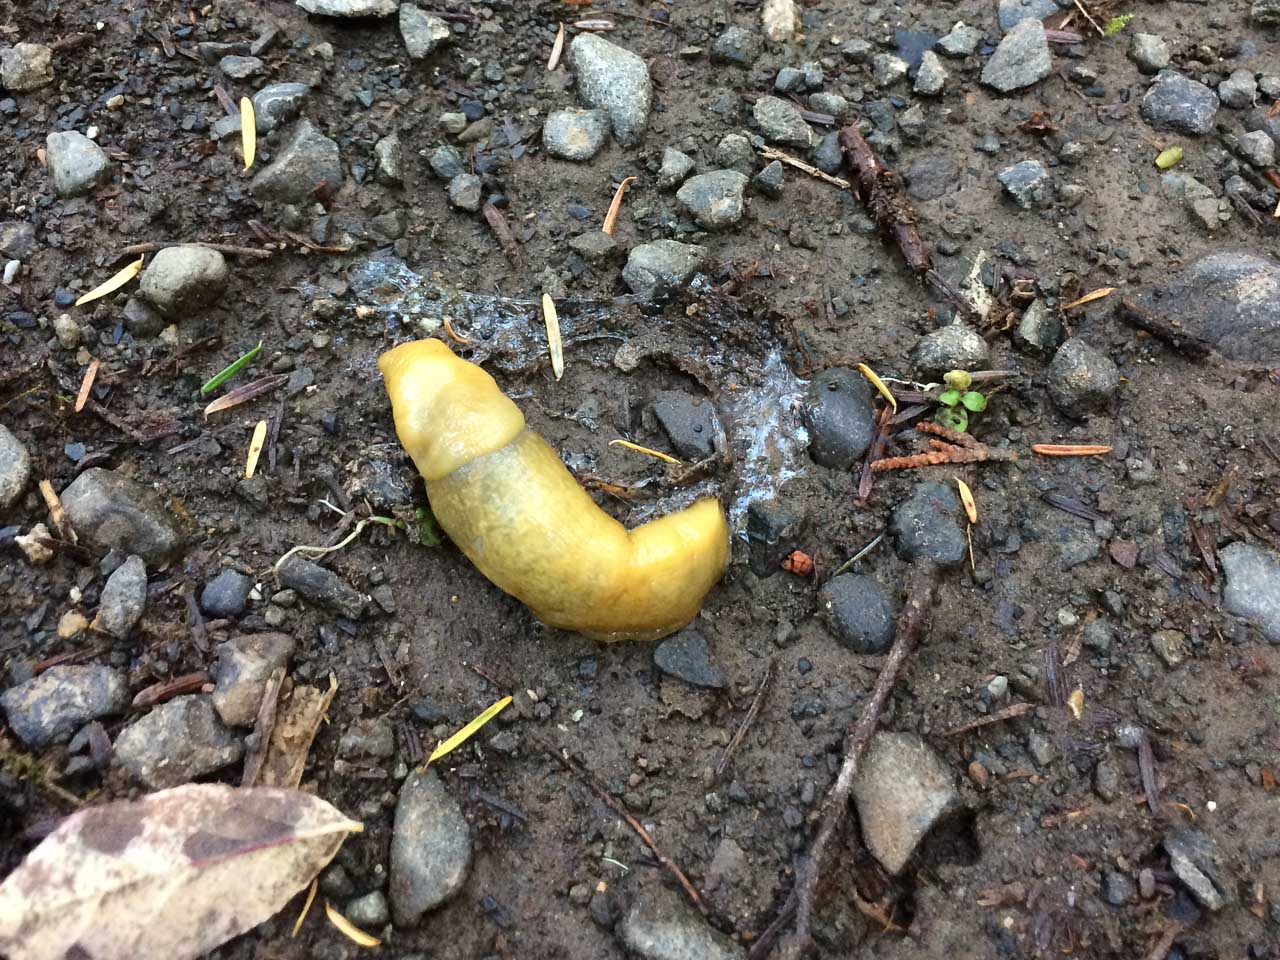 Banana slug in the rain forests of Olympic National Park